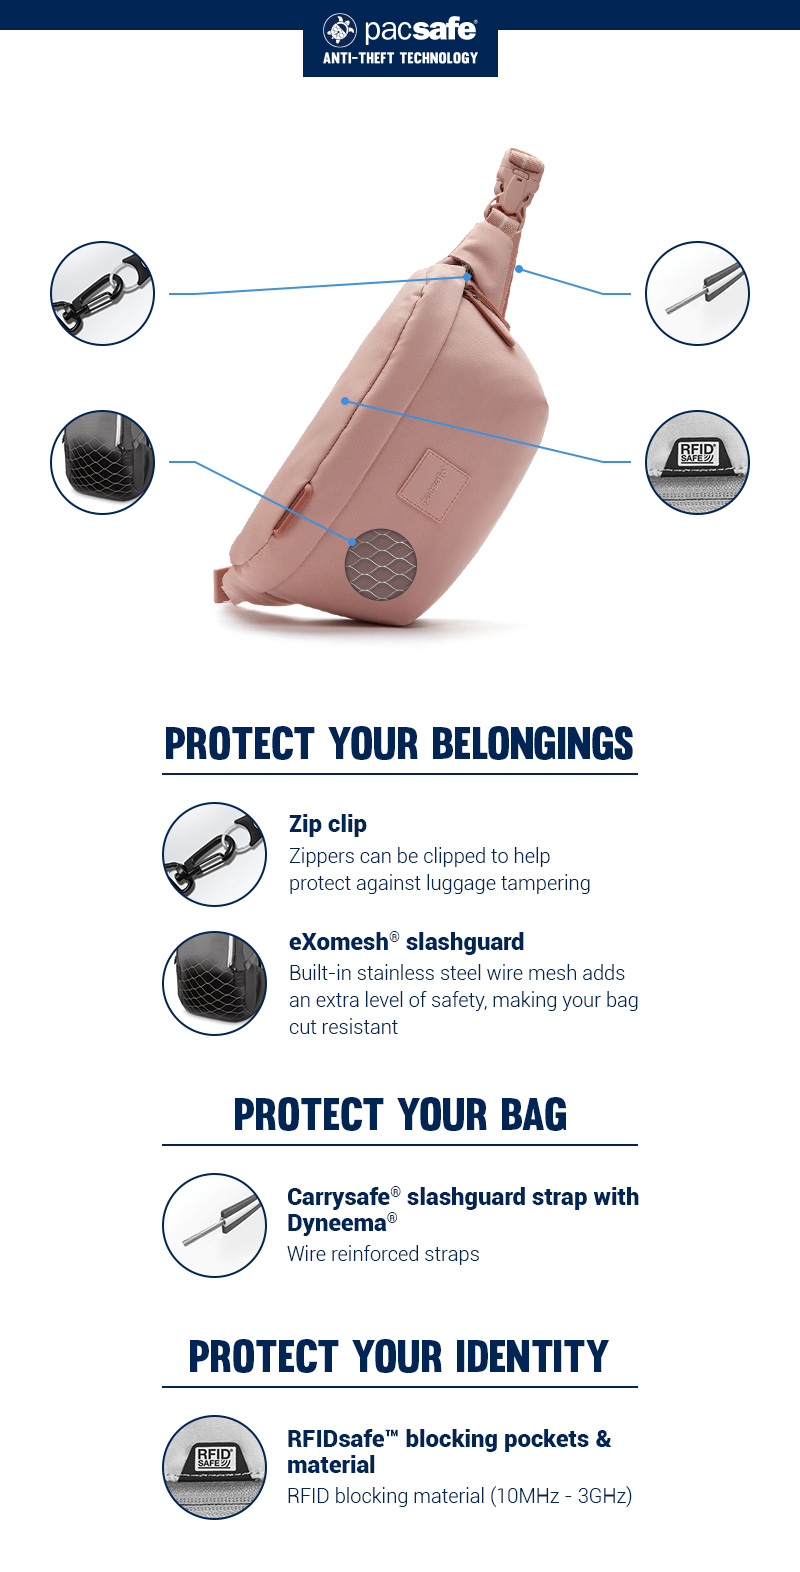 Protect Your Belongings - Zip Clip - Zippers can be clipped to help protect against luggage tempering. 
eXomesh slashguard - Built-in stainless steel wire mesh adds an extra level of safety, making your bag cut resistant.
Protect Your Bag - Carrysafe slashguard strap with Dyneema - wire reinforced straps.
Protect Your Identity - RFIDsafe blocking pockets & material - RFID blocking material (10 MHz - 3 GHz)